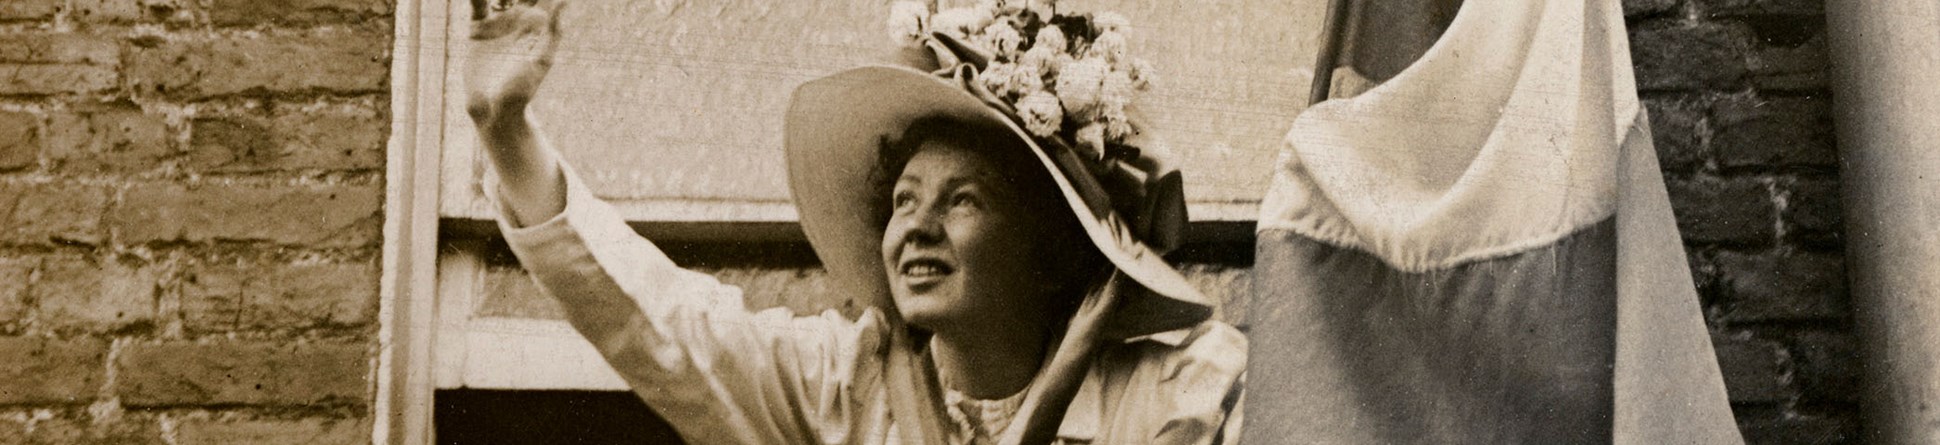 Christabel Pankhurst waving out of a window, with a flag in her left hand, wearing large straw hat with flowers on top.